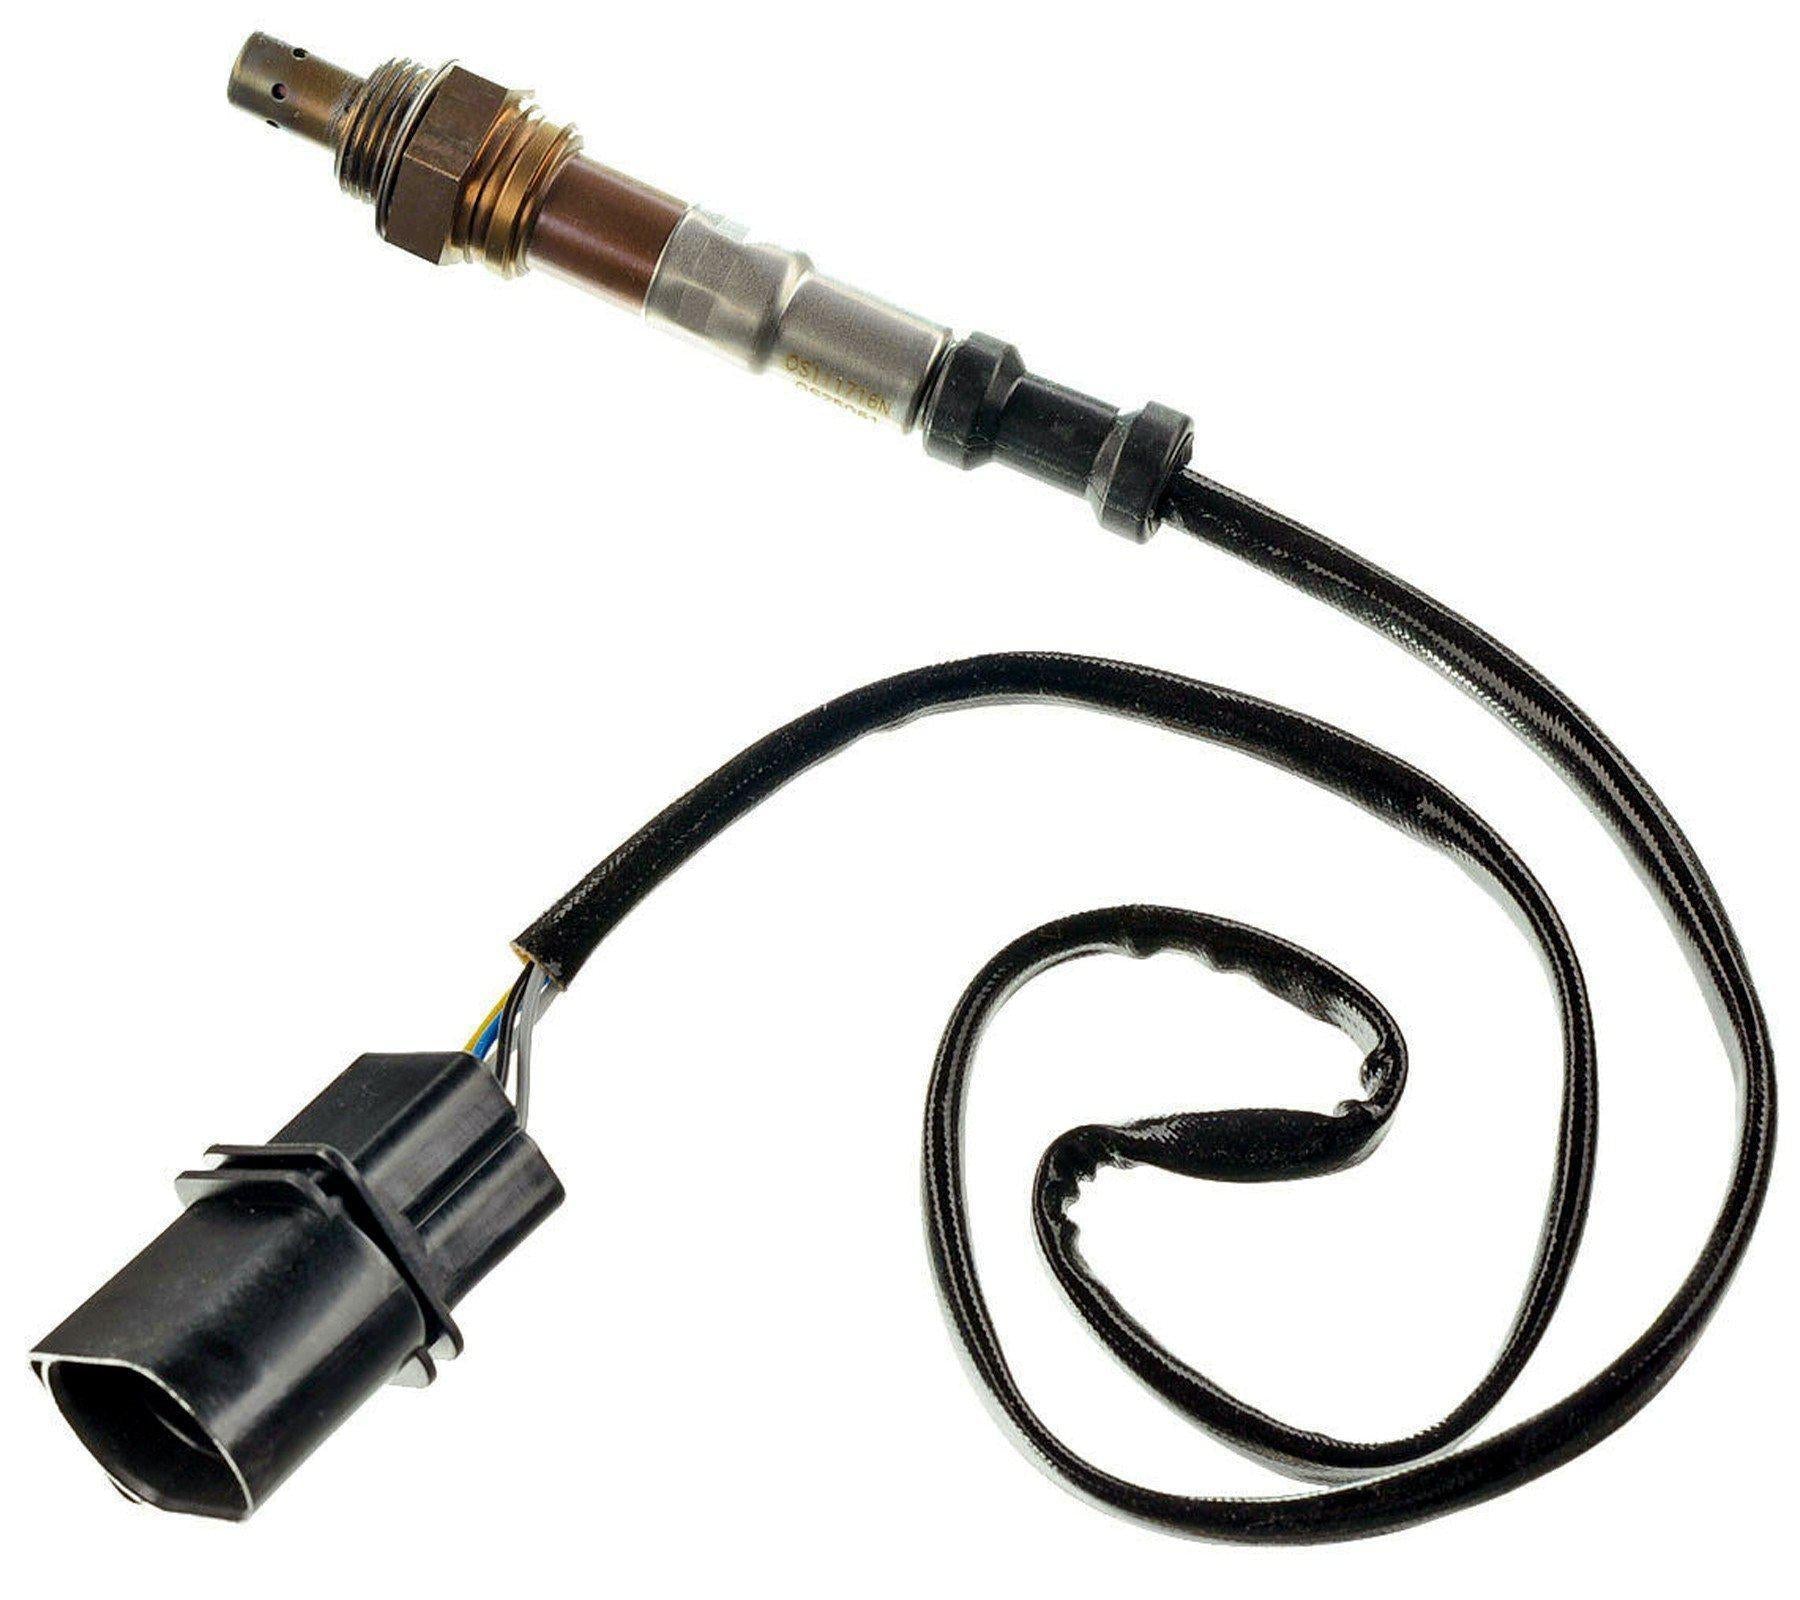 5 Wire Front Oxygen Sensor (Pre-Cat) For Audi, VW, Seat and Skoda